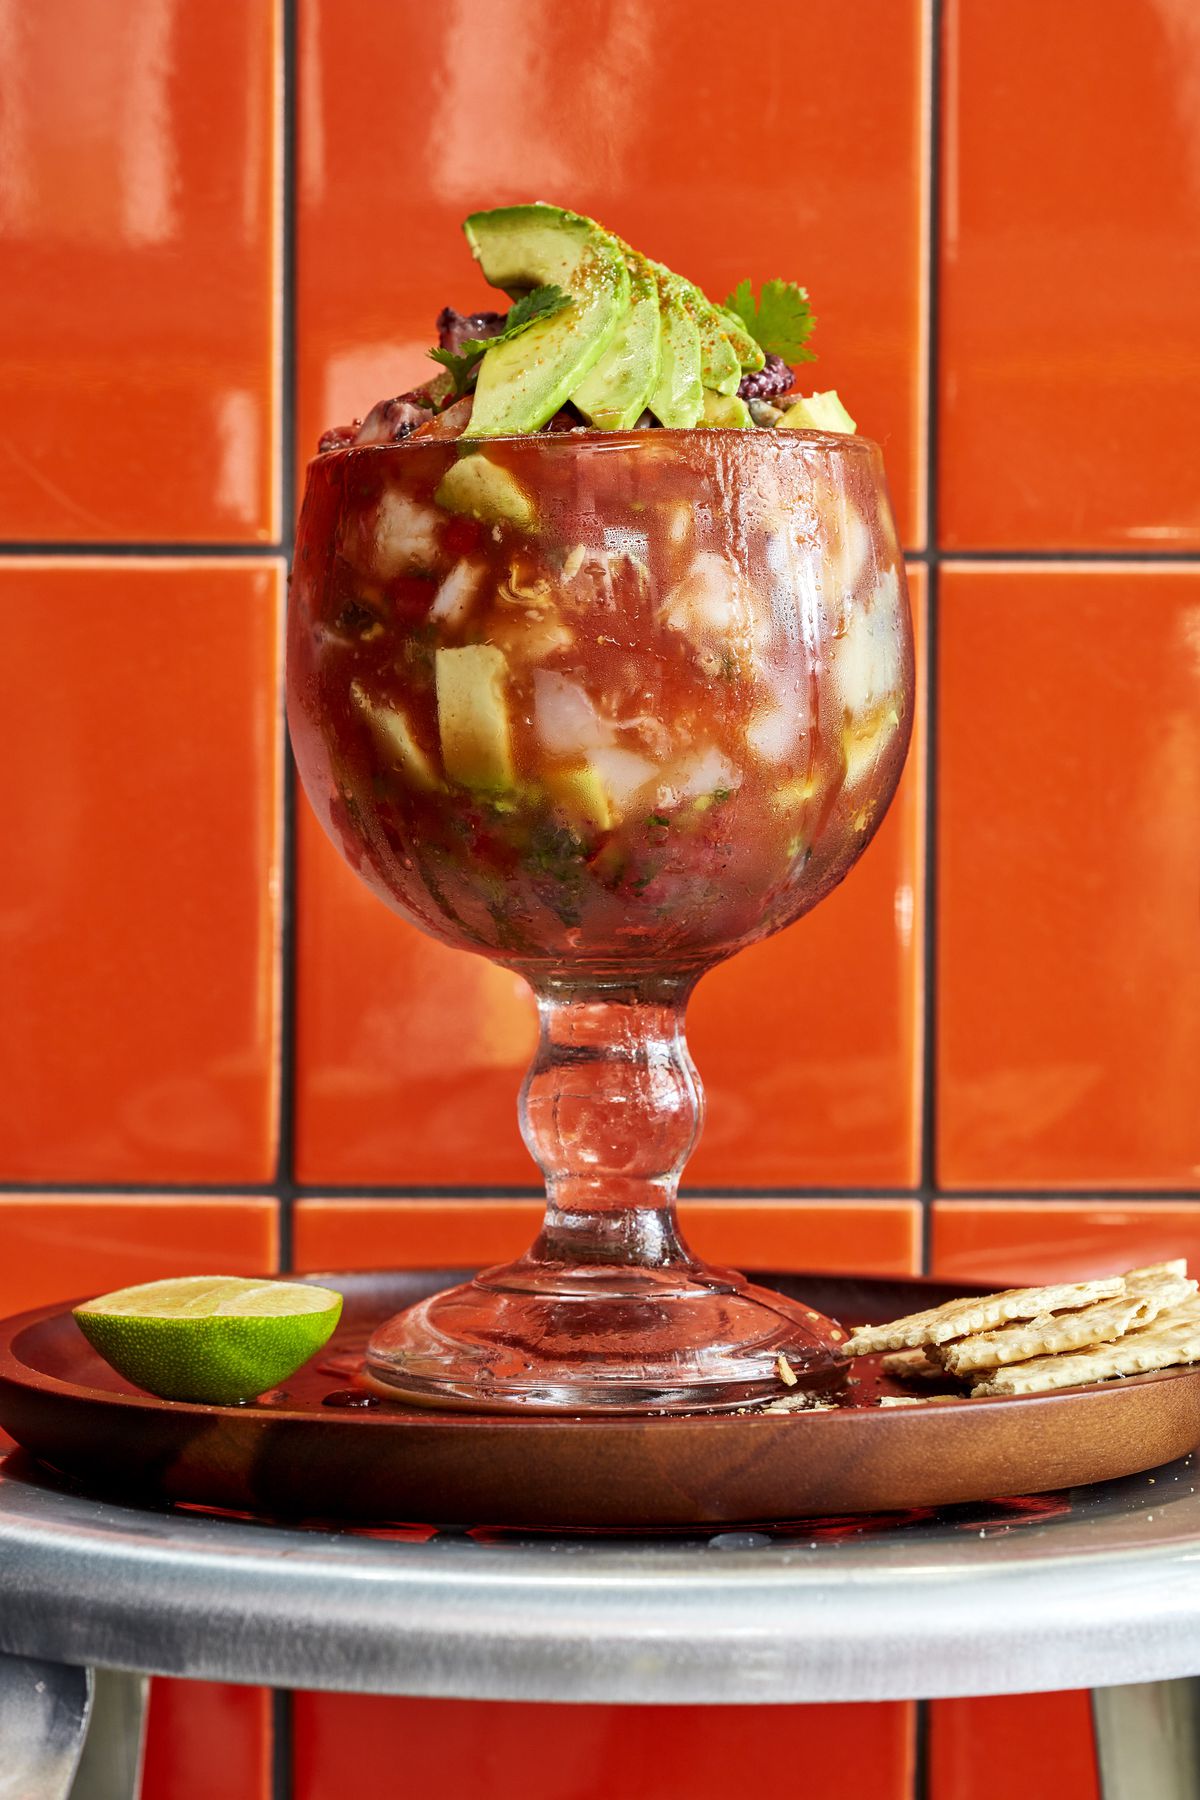 A goblet of ceviche against a red tiled background.